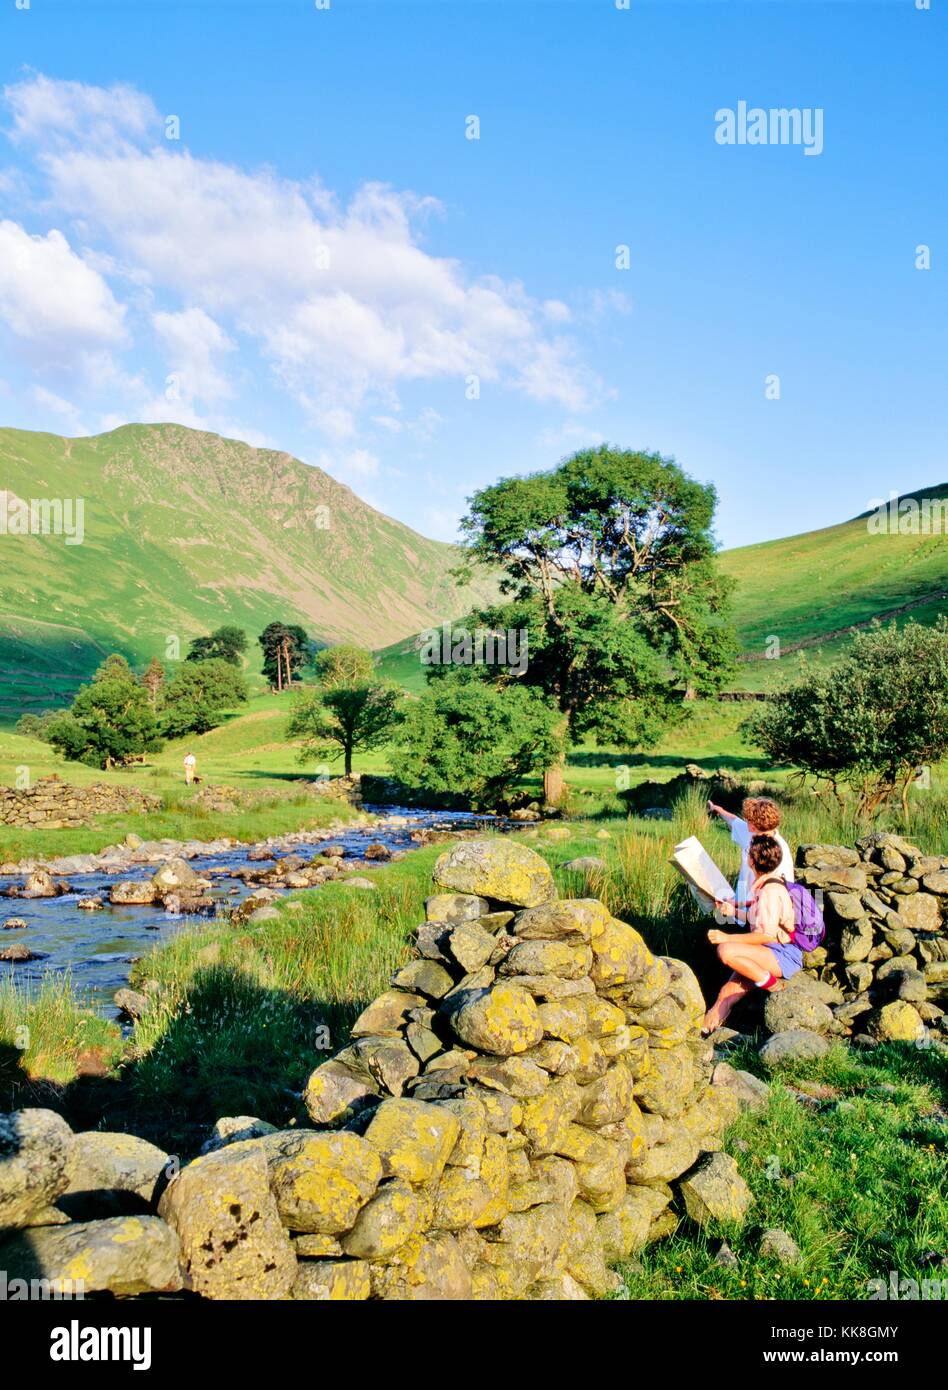 Fell walkers plan their trail route near Hartsop, south of Ullswater, in the Lake District National Park, Cumbria, England. Stock Photo